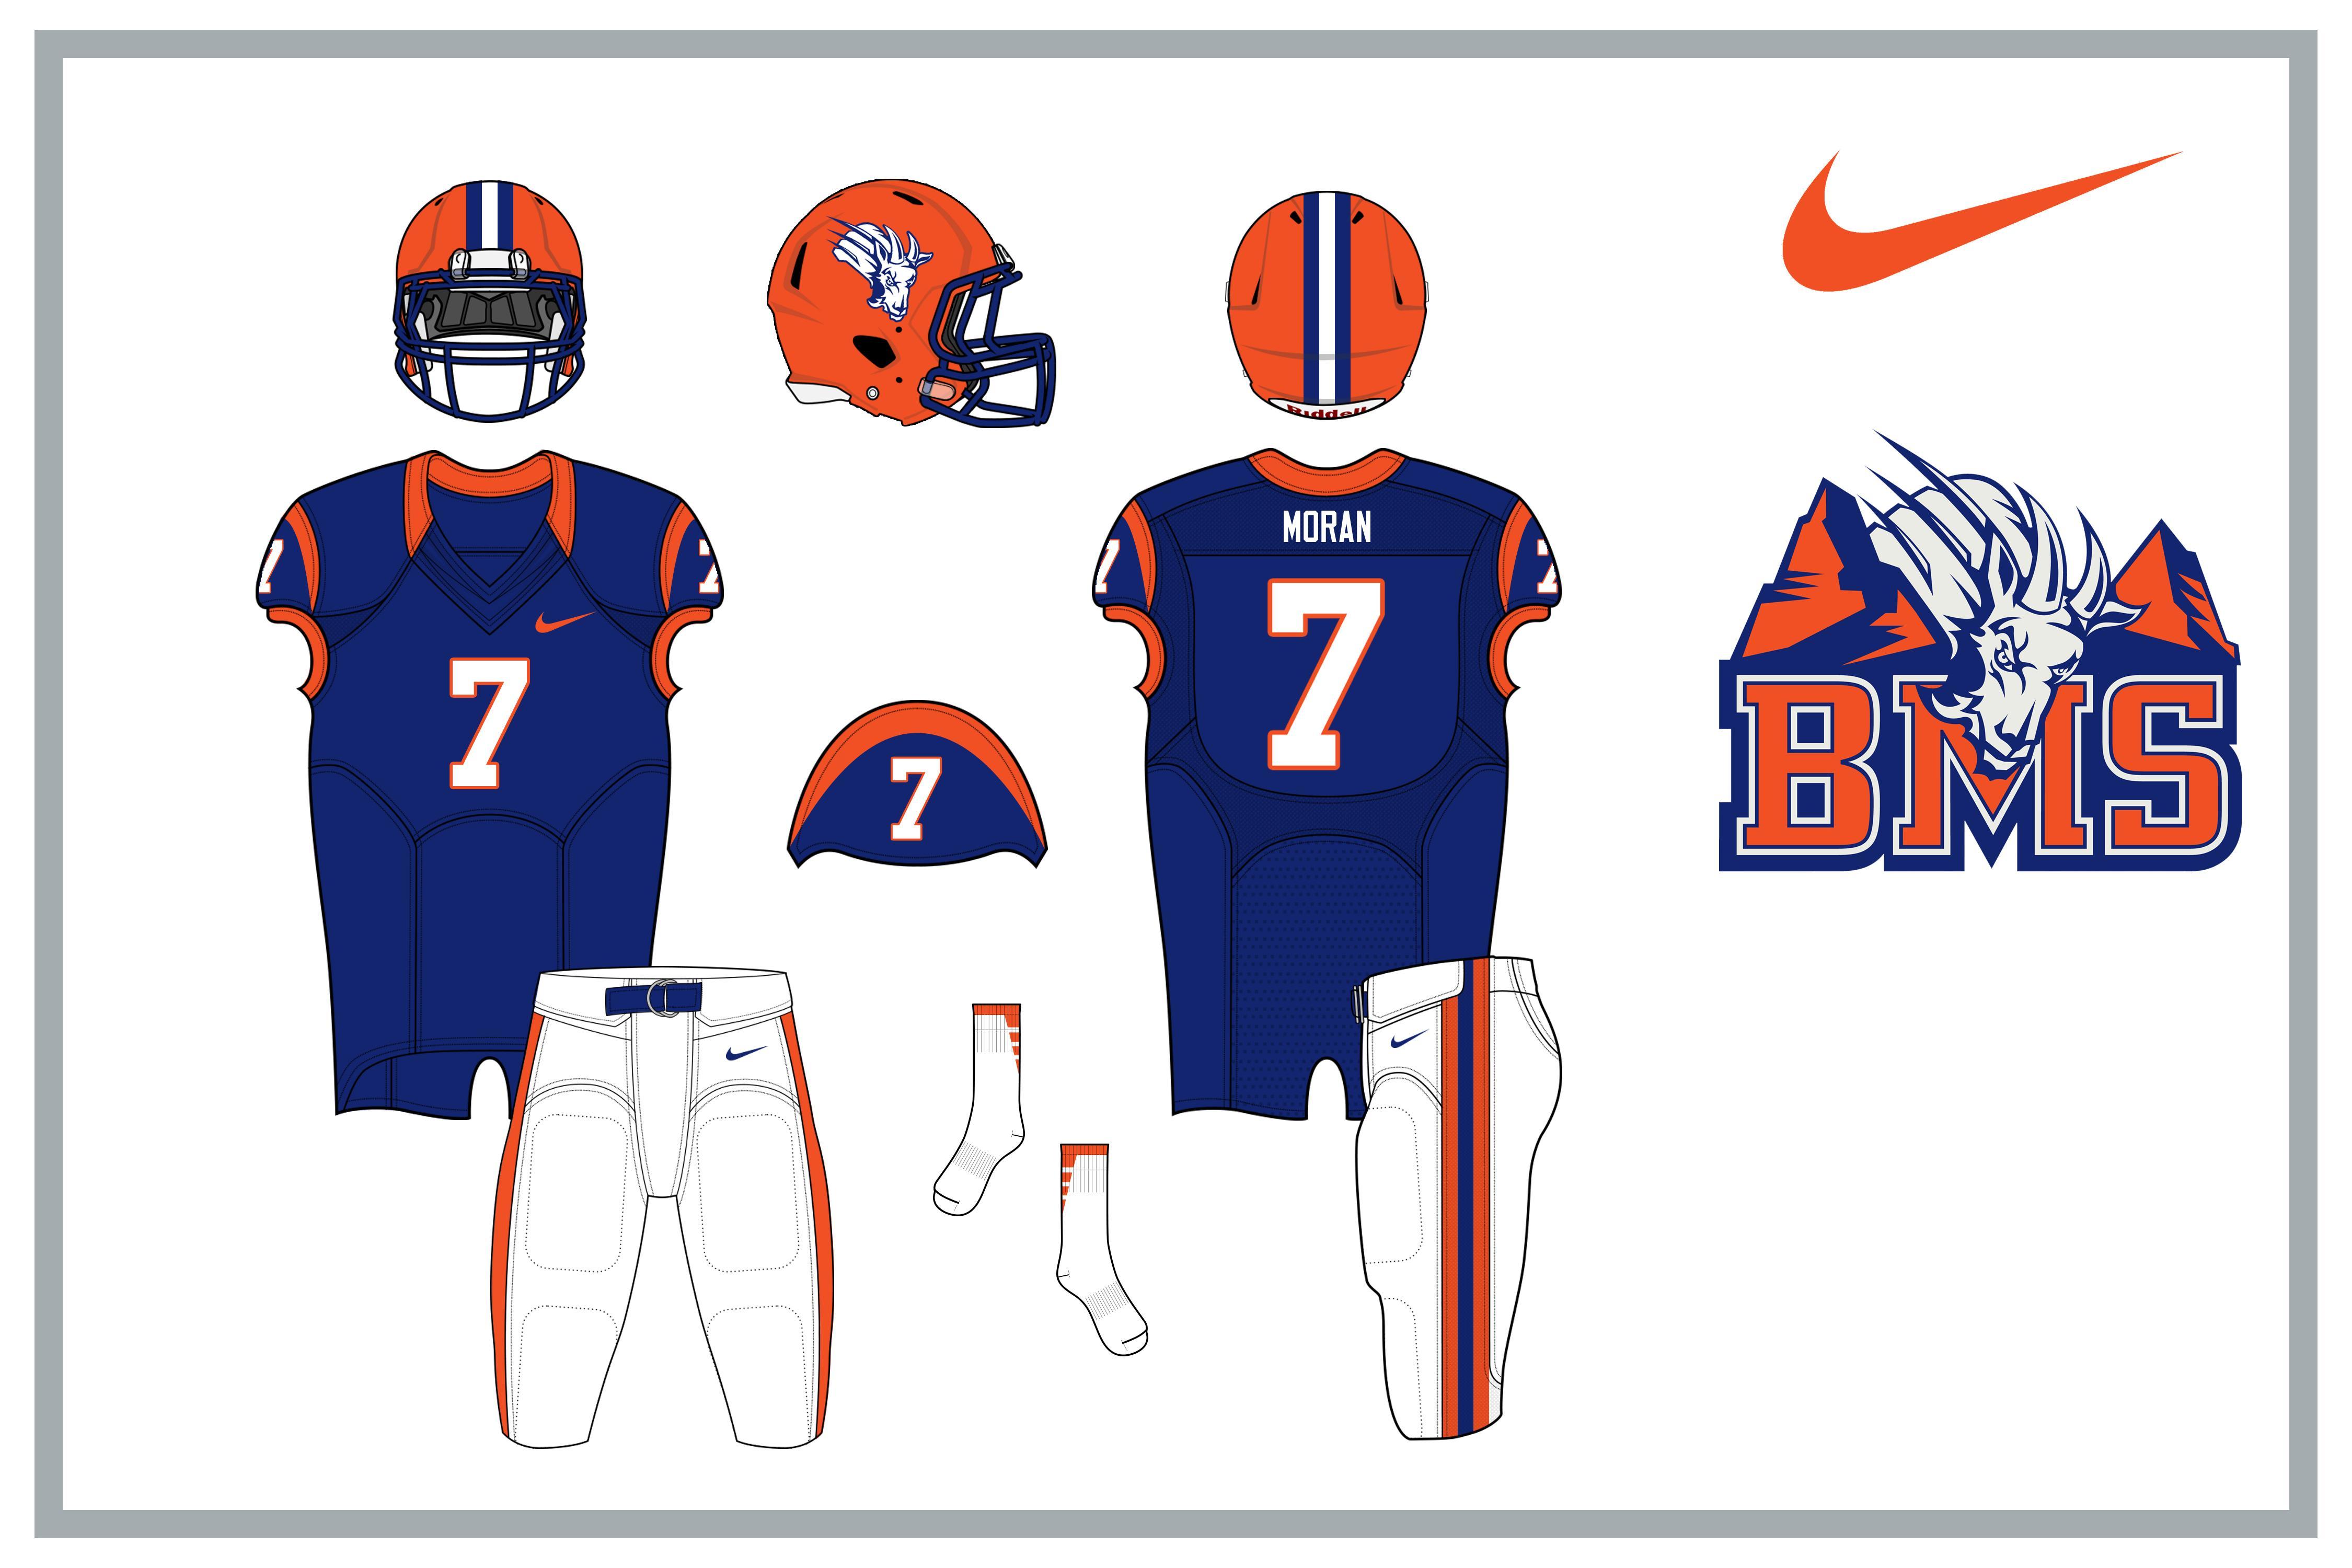 Blue Mountain State Logo - Football Teams From TV and Movies SCLSU Mud Dogs Updated & Miami